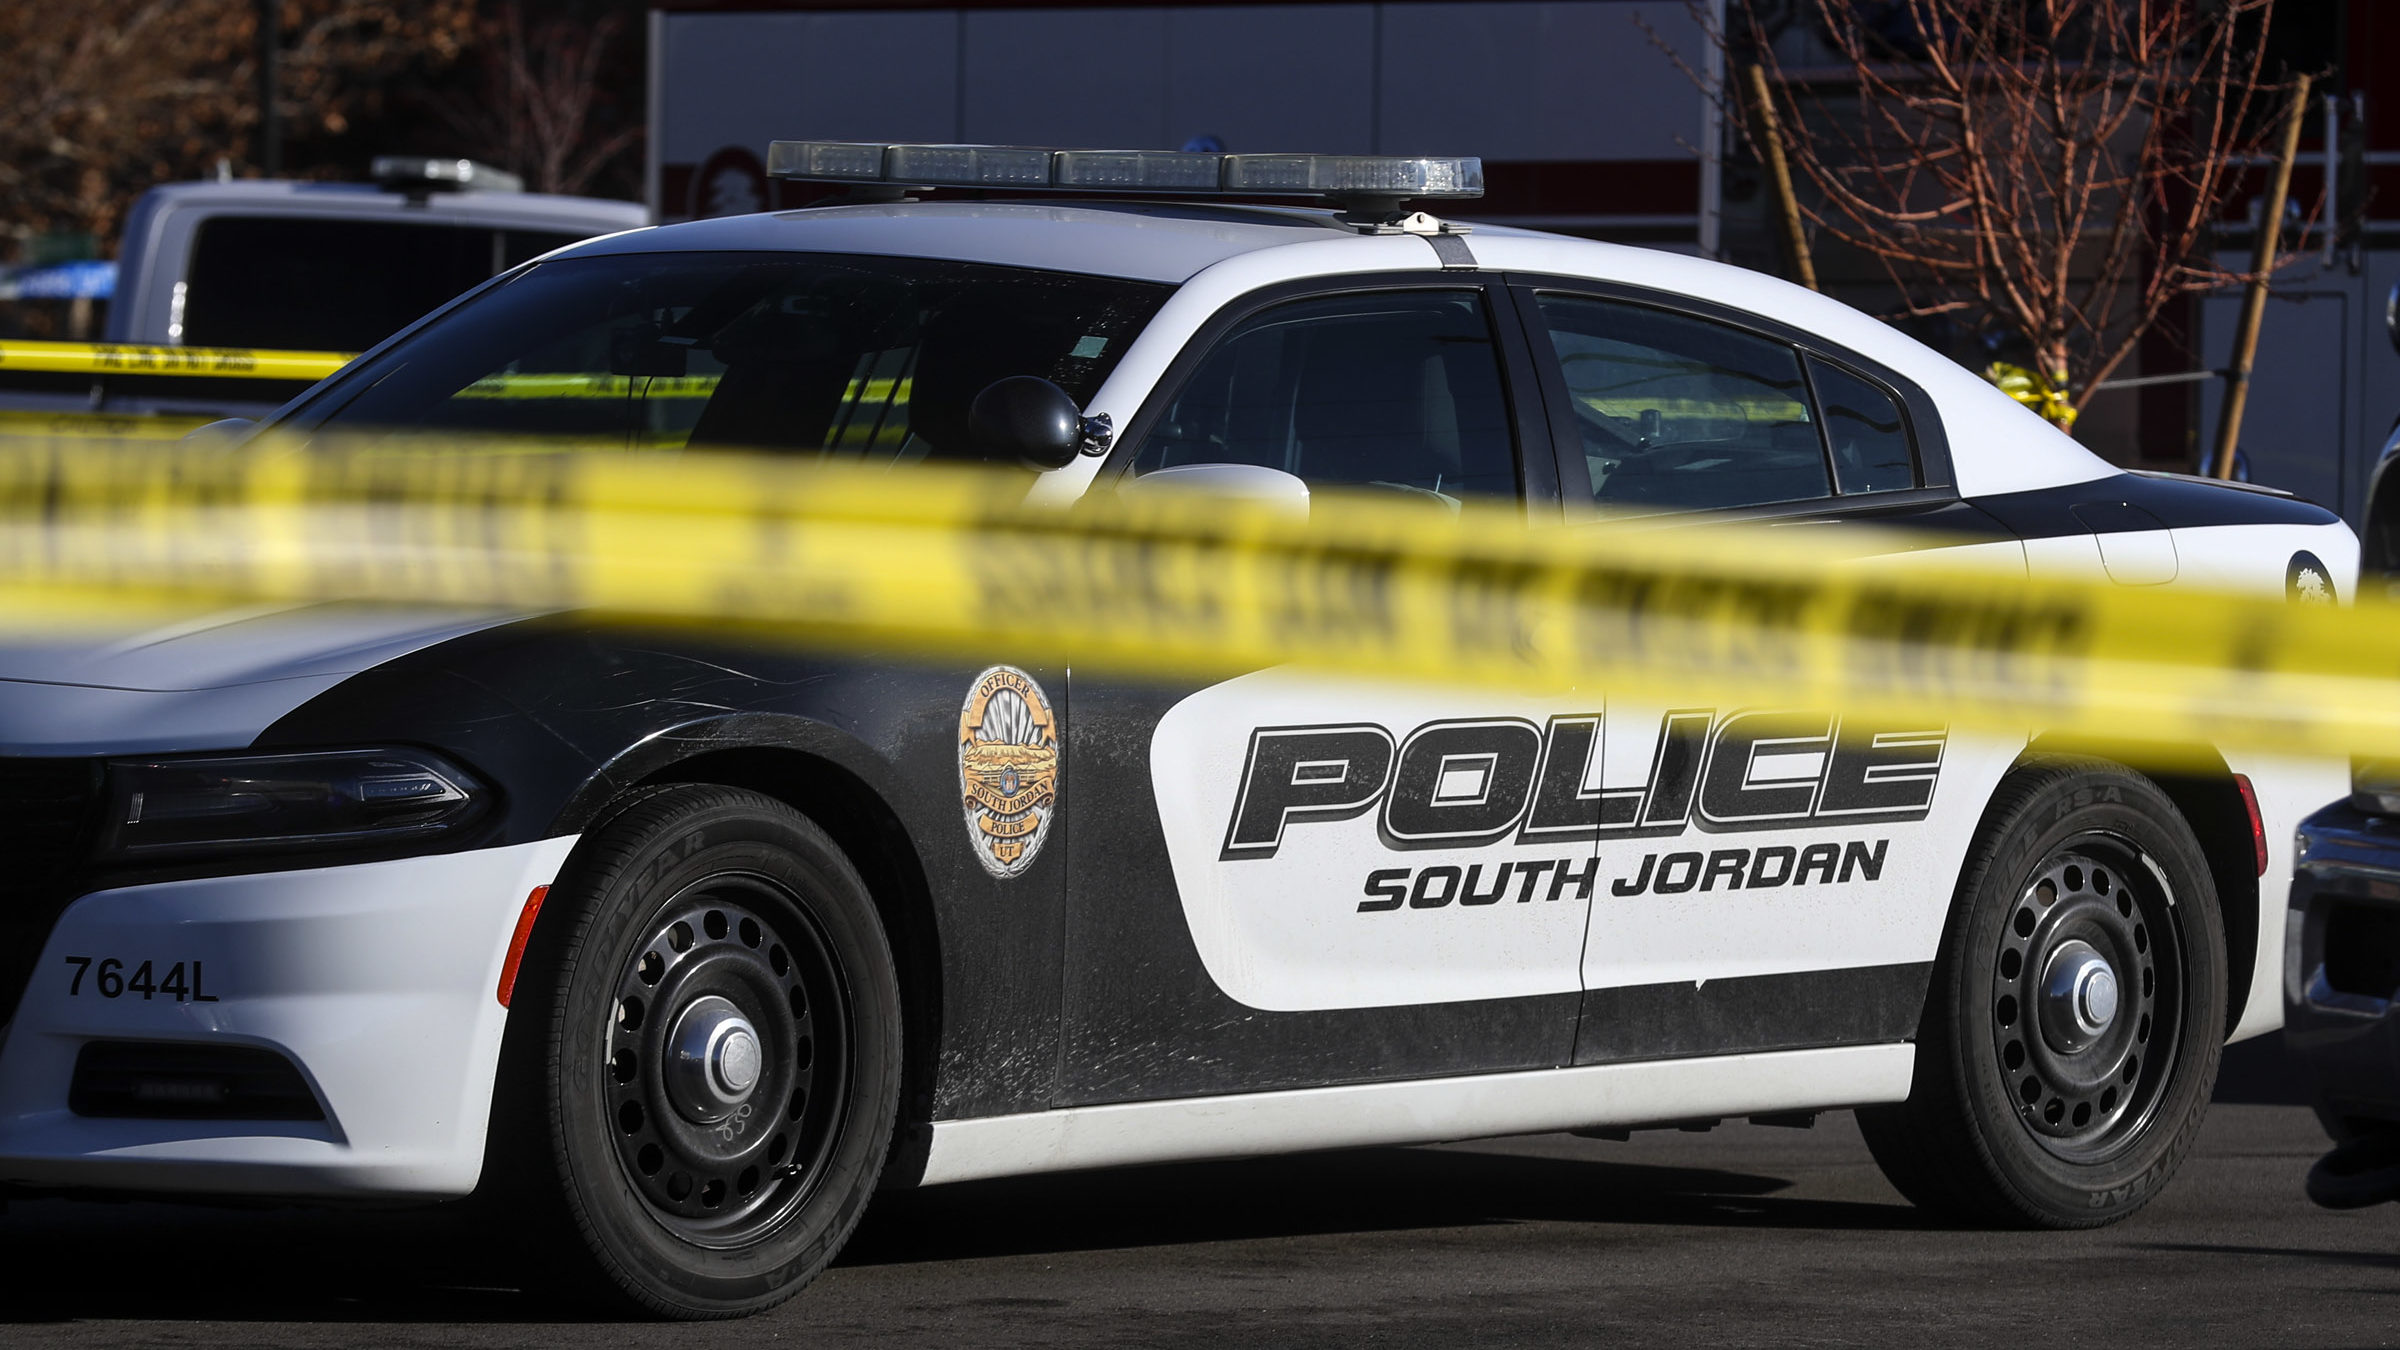 South Jordan police cars pictured....